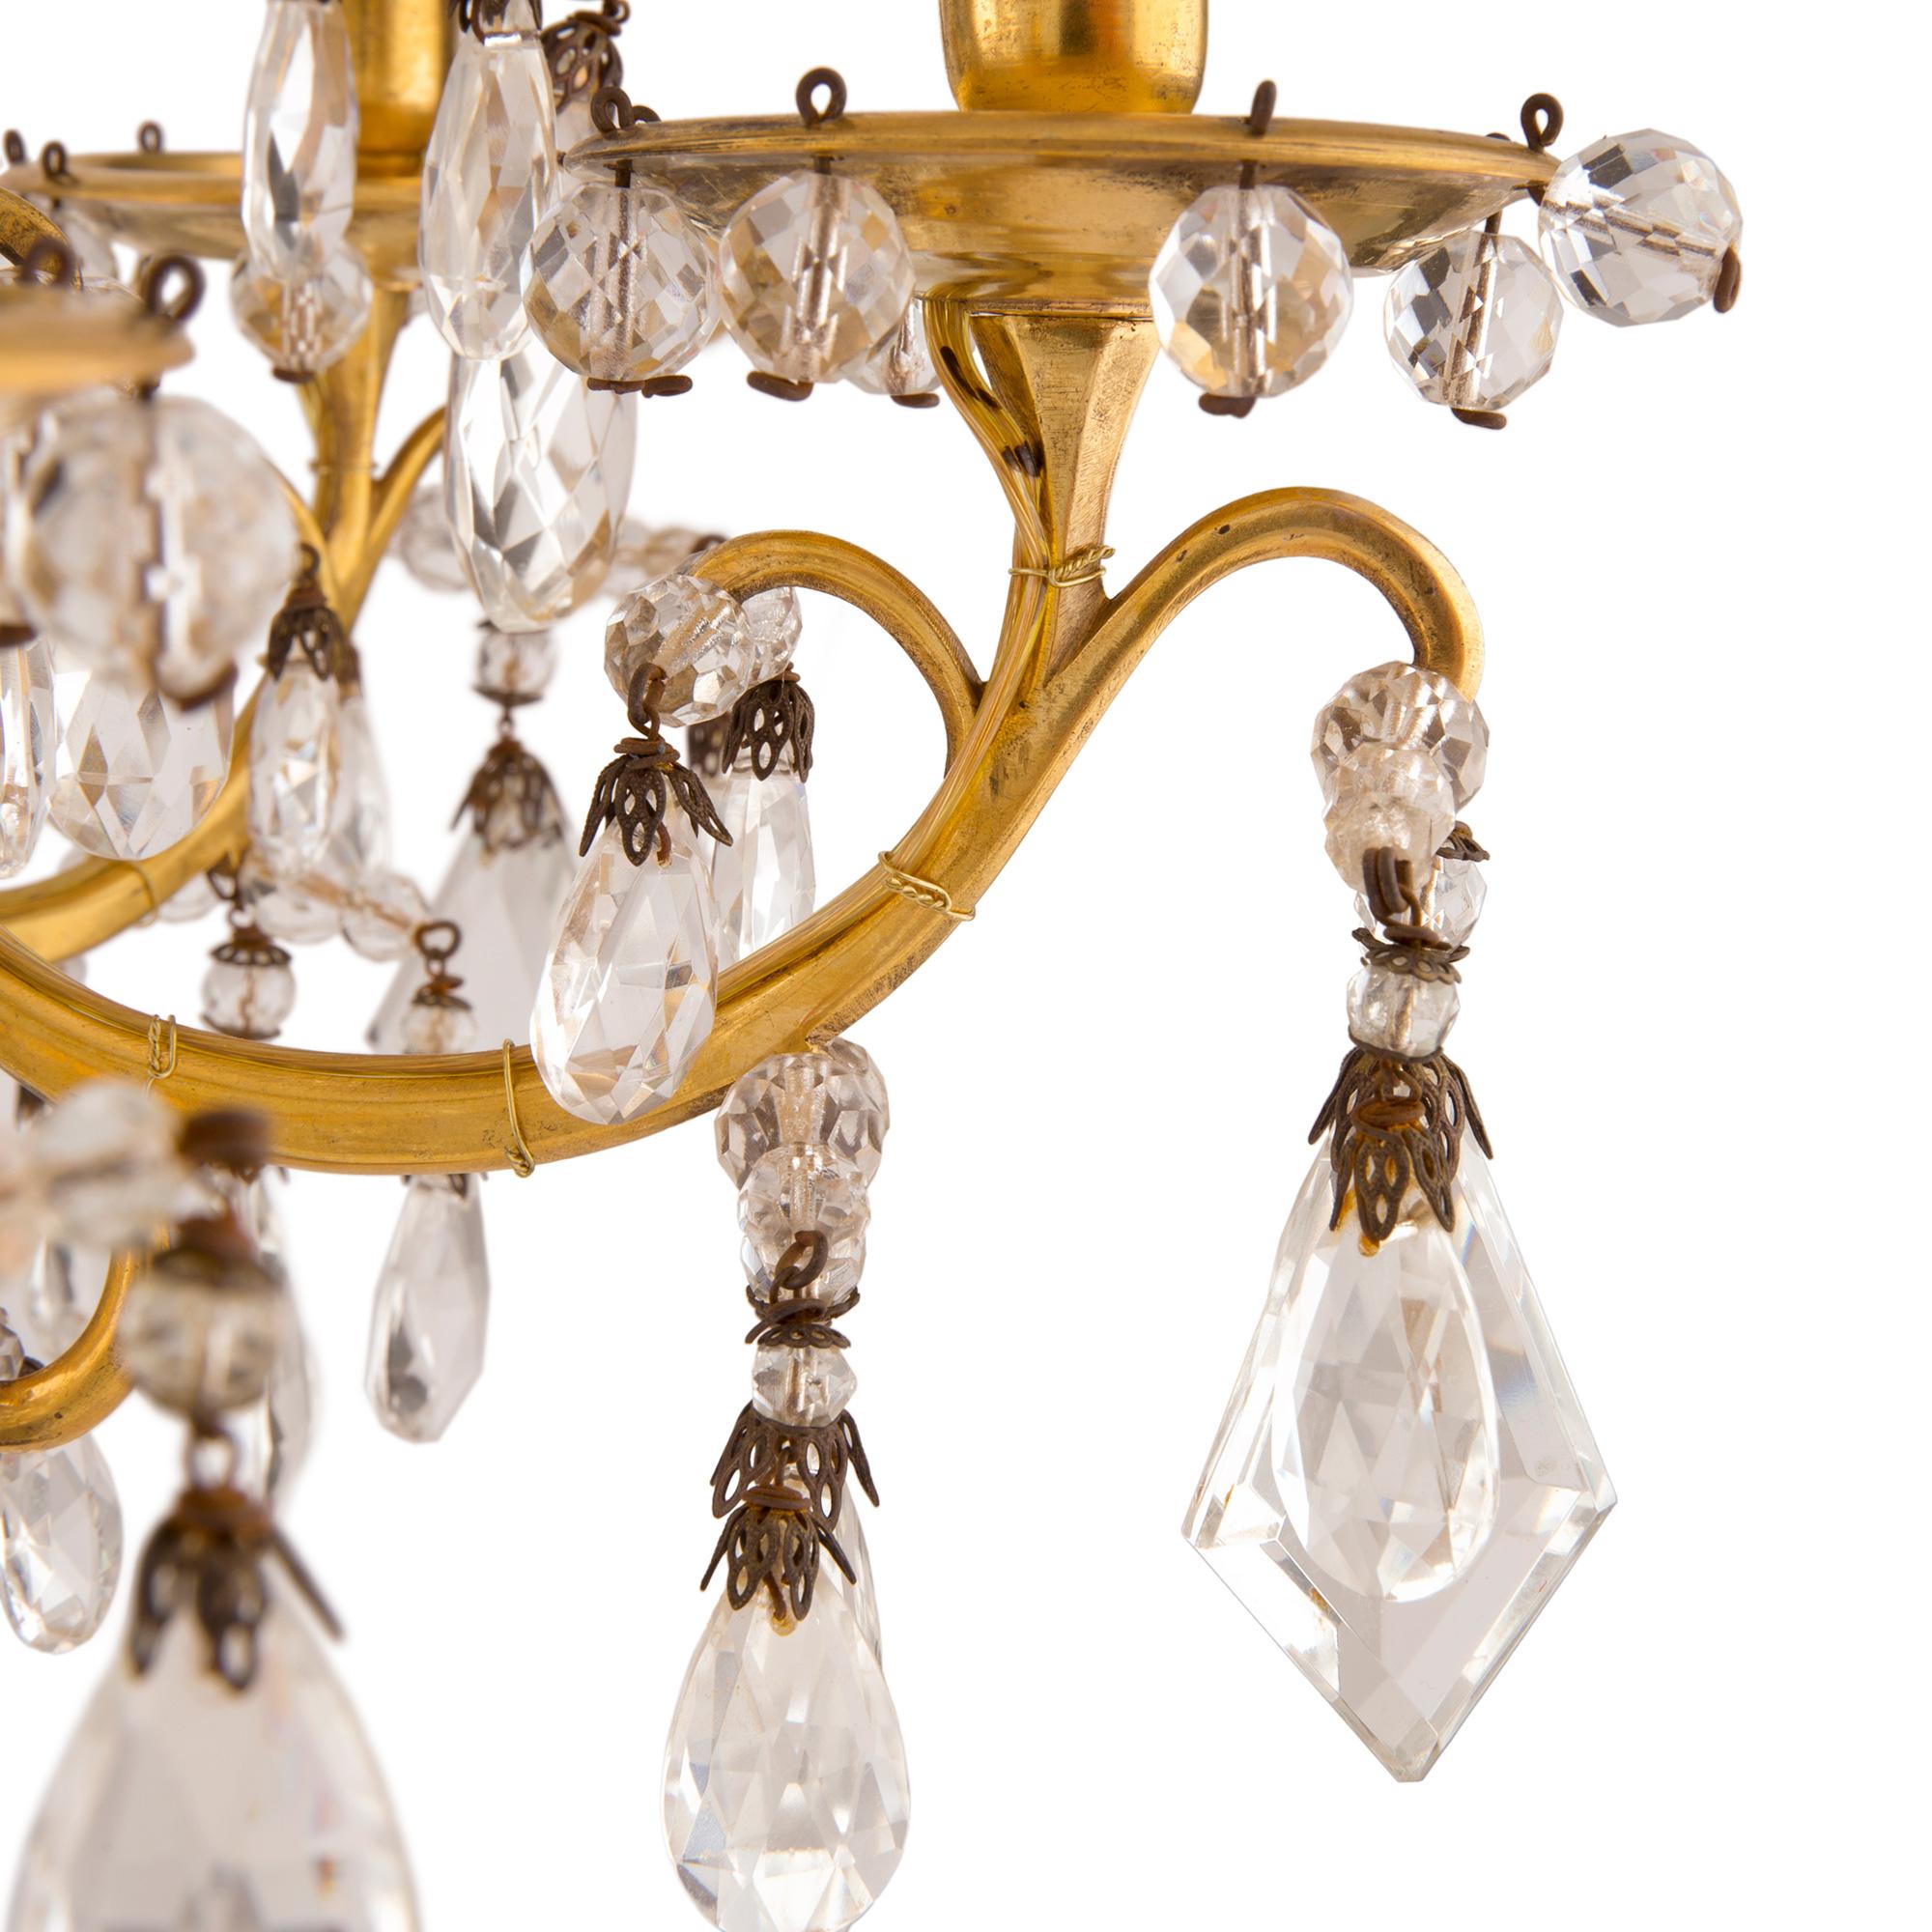 French 19th Century Louis XVI Style Ormolu and Baccarat Crystal Girandole Lamps For Sale 2